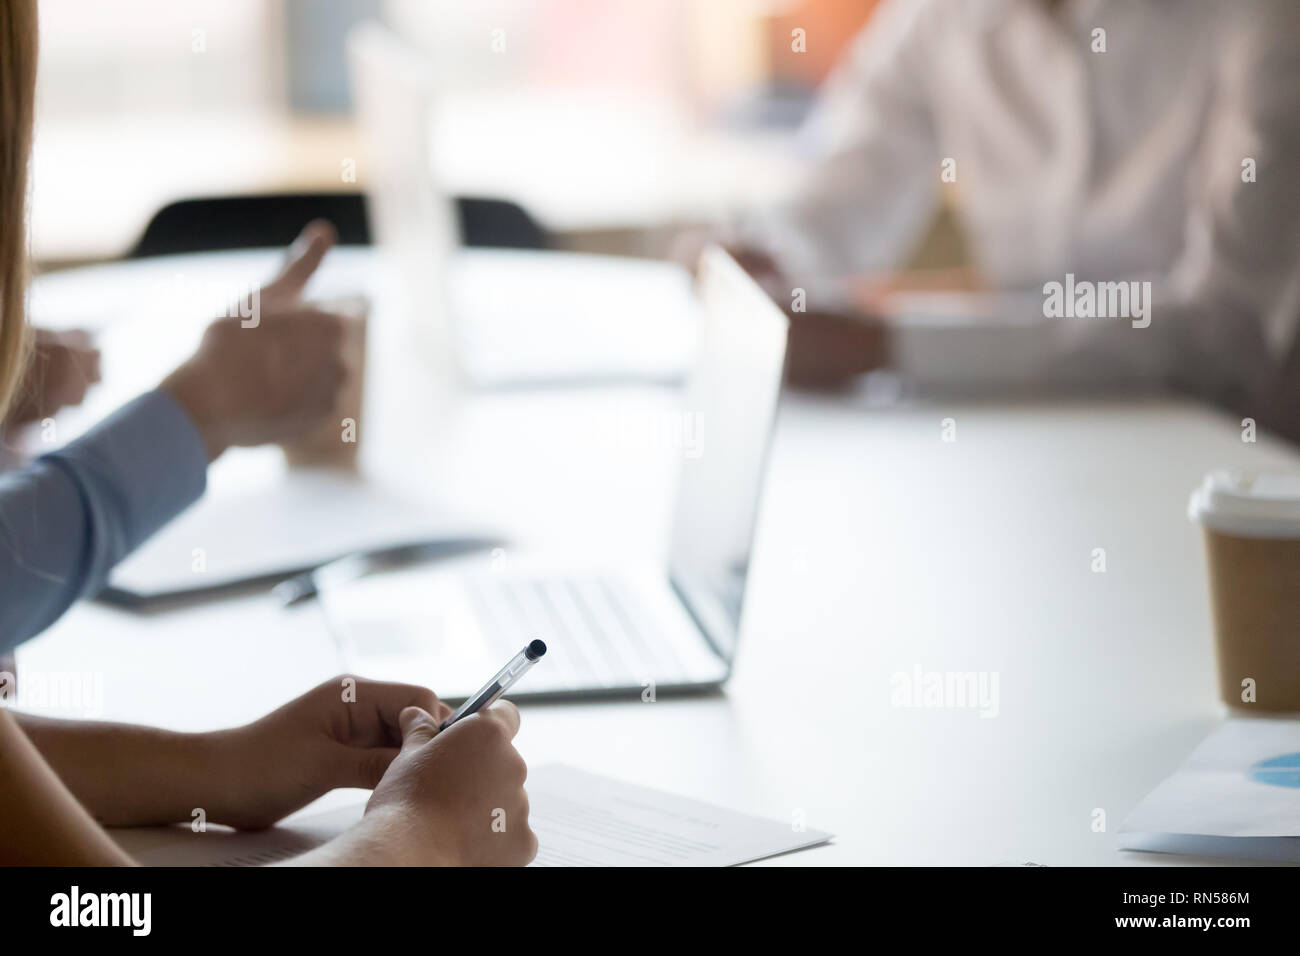 Businesspeople sitting at desk solve issues closeup of people hands Stock Photo